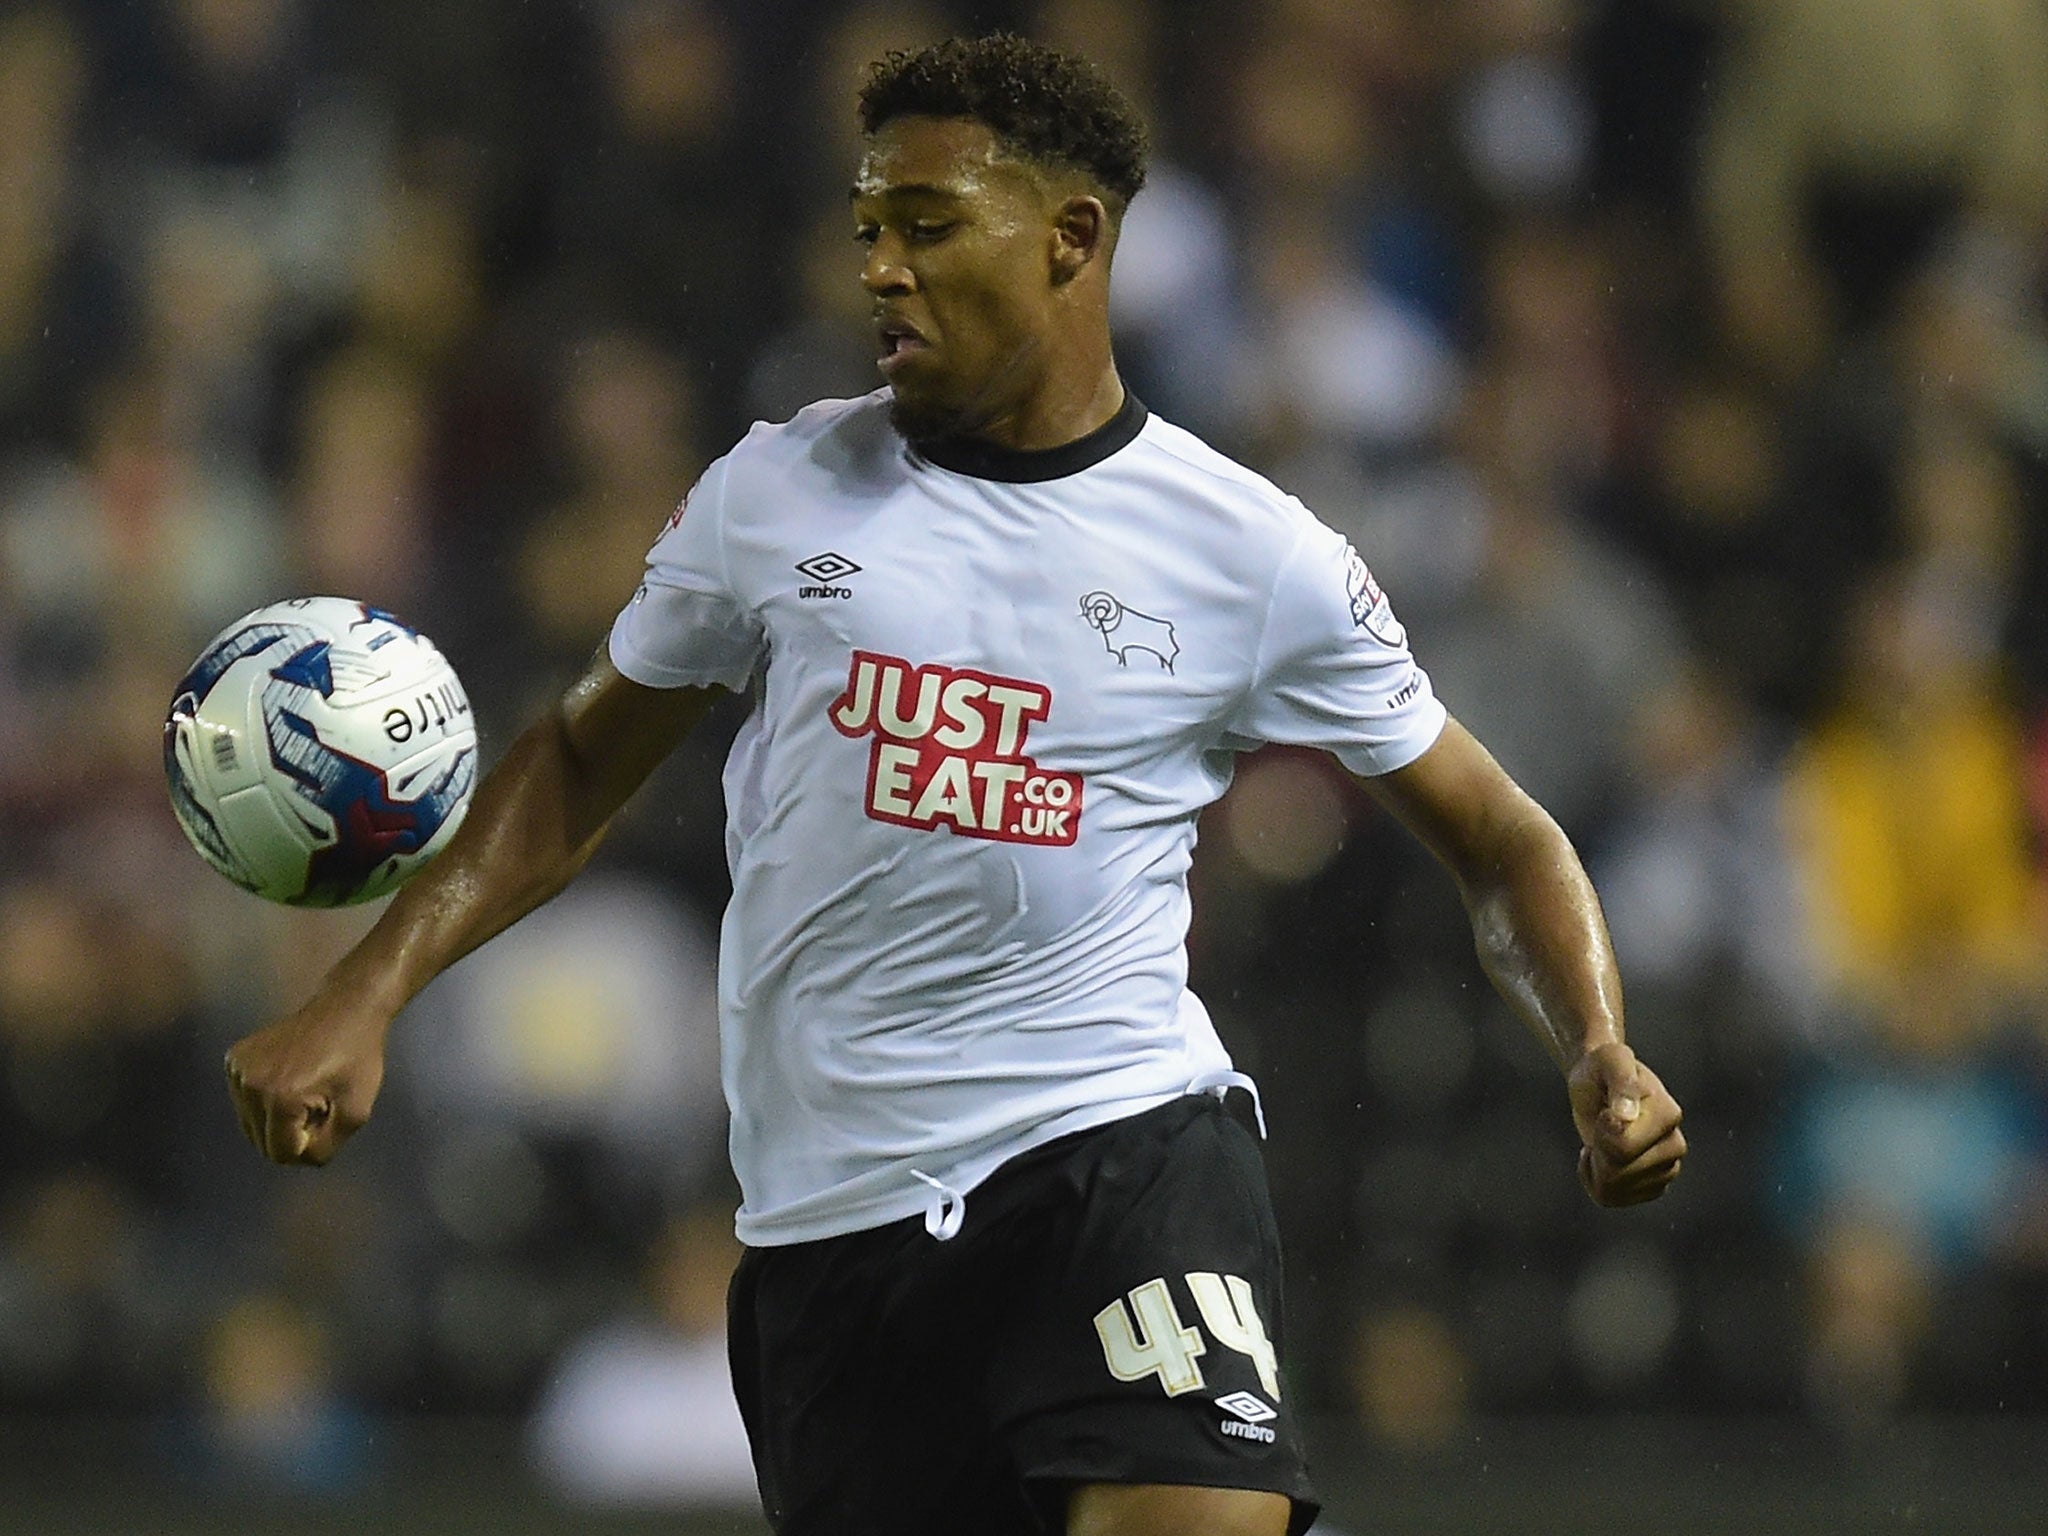 The teenager impressed on loan at Derby County